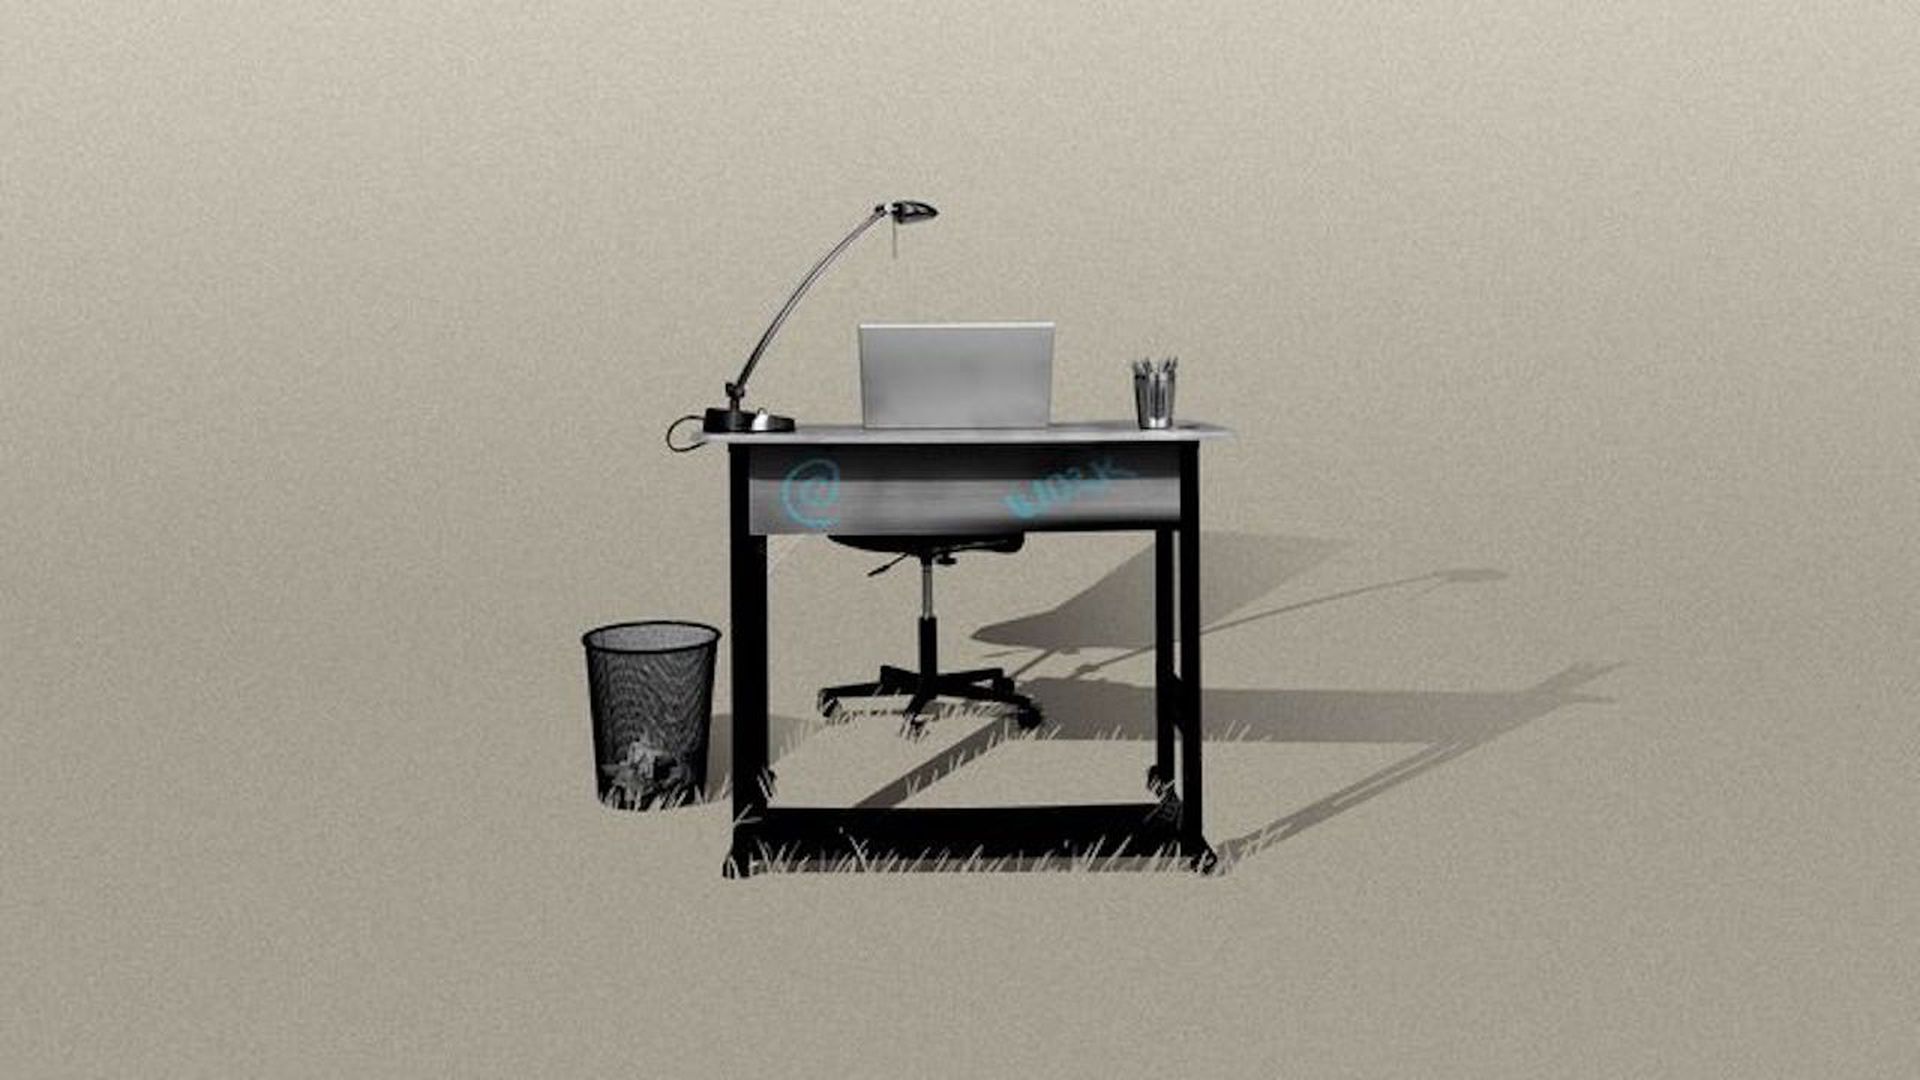 Illustration of a modern work desk with a laptop on it and the hint of stems of grass on the ground around it